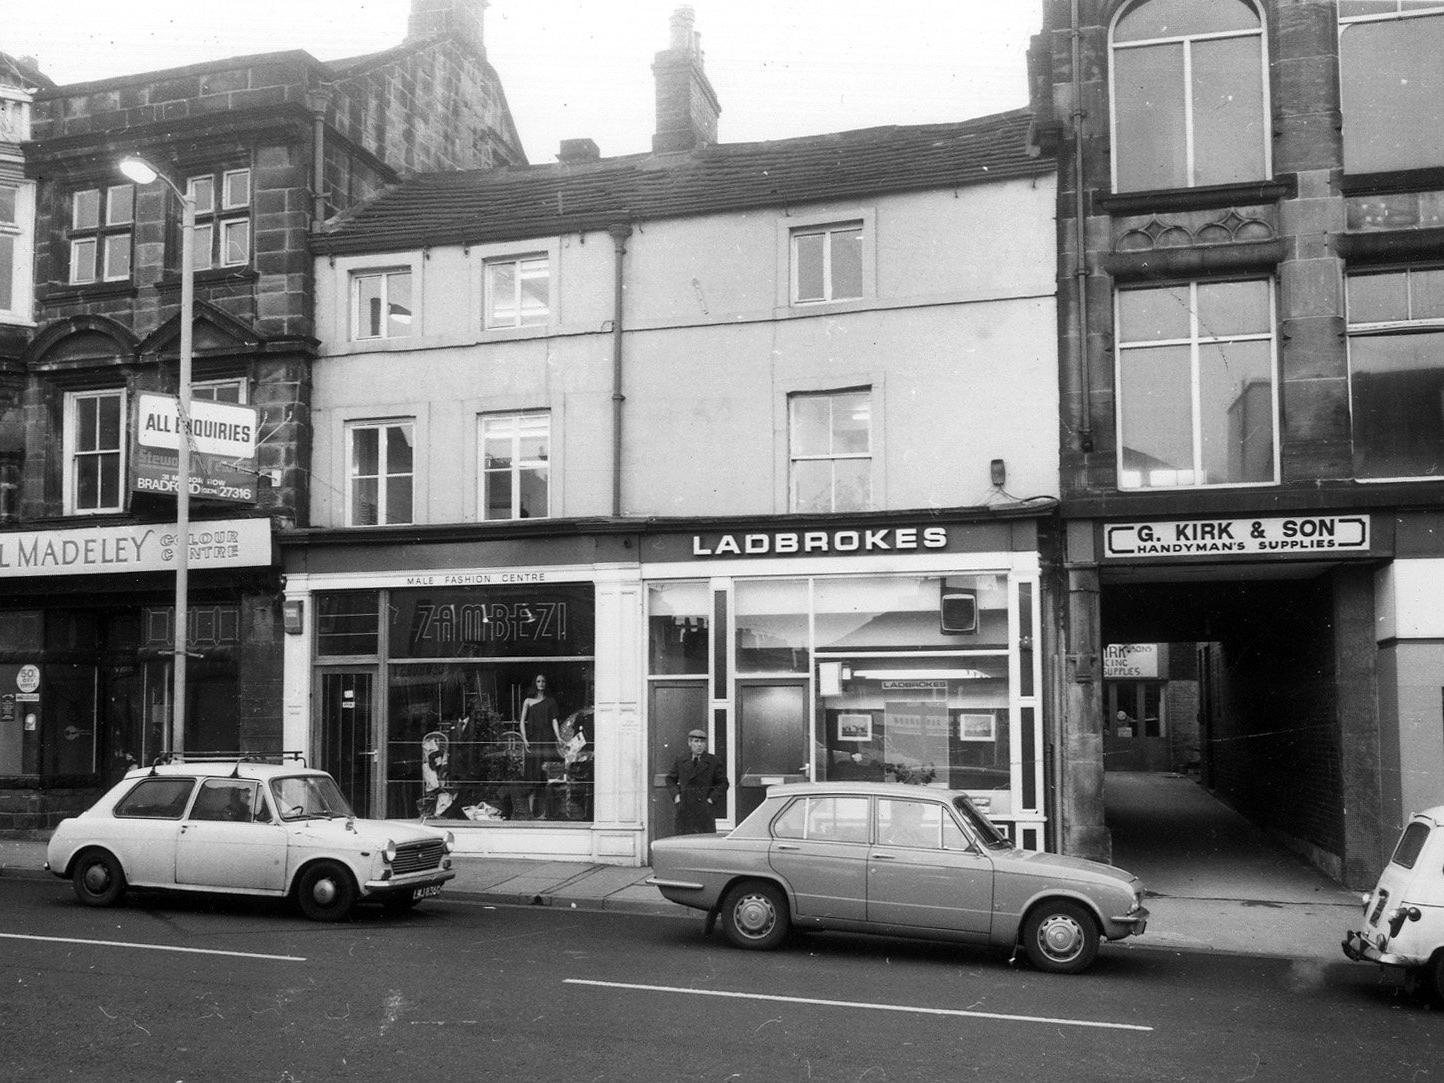 West side of Kirkgate. Pictured, right to left, Freeman Hardy Willis footwear, G. Kirk & Son, handyman's supplies, Ladbrokes, Zambezi ladies' and men's wear and the vacant Paul Madeley's Colour Centre.